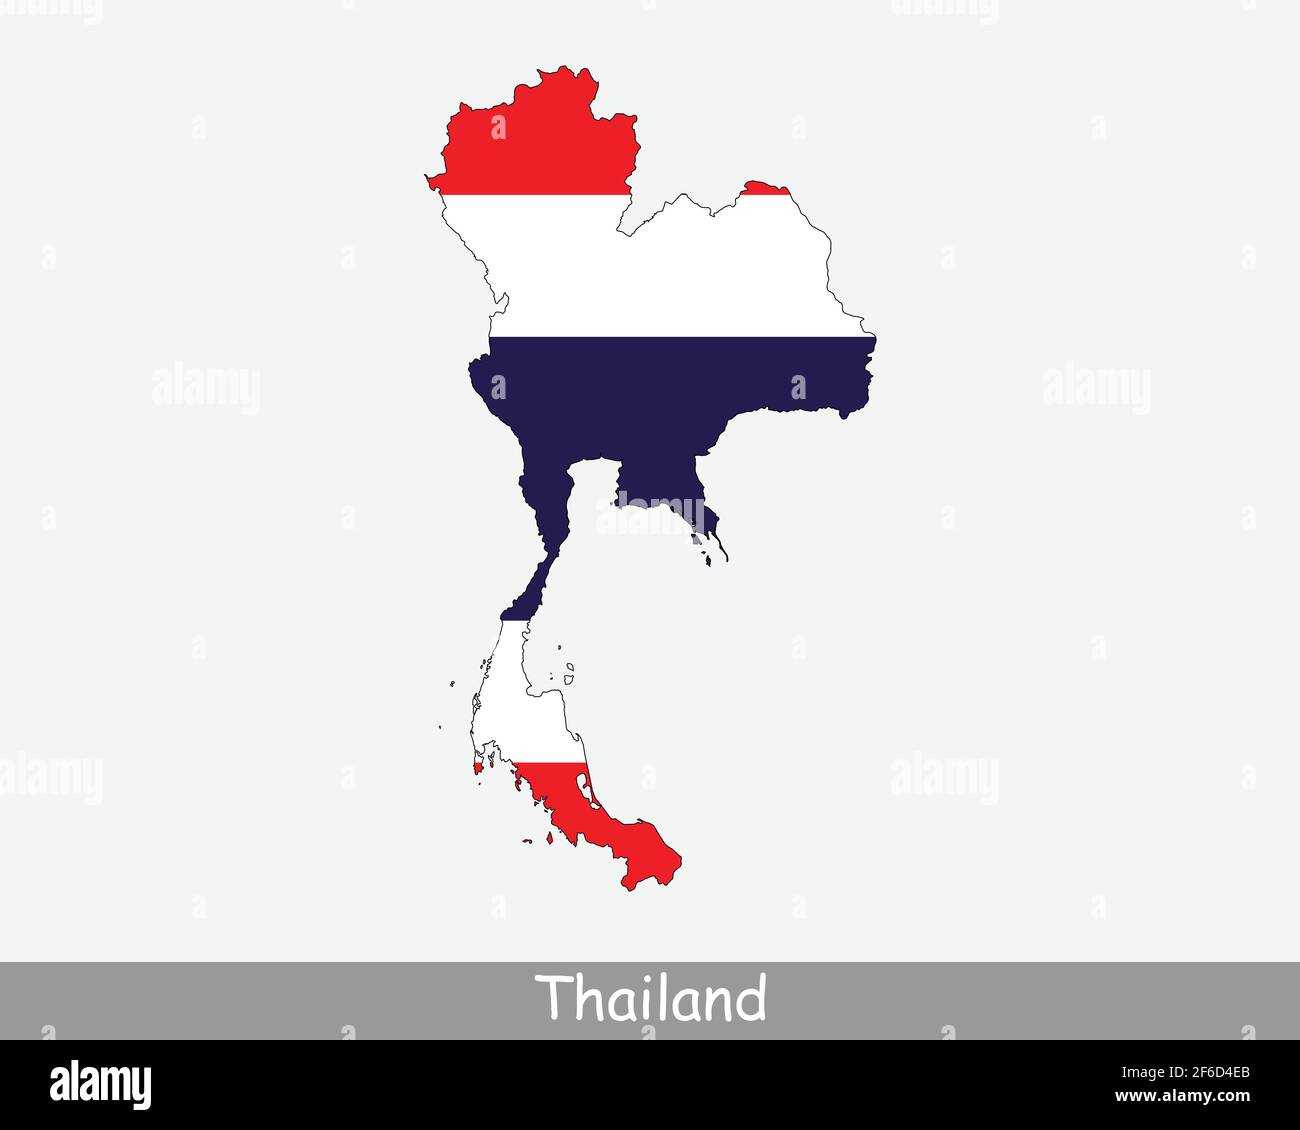 Thailand Flag Map. Map of the Kingdom of Thailand with the Thai national flag isolated on a white background. Vector Illustration. Stock Vector